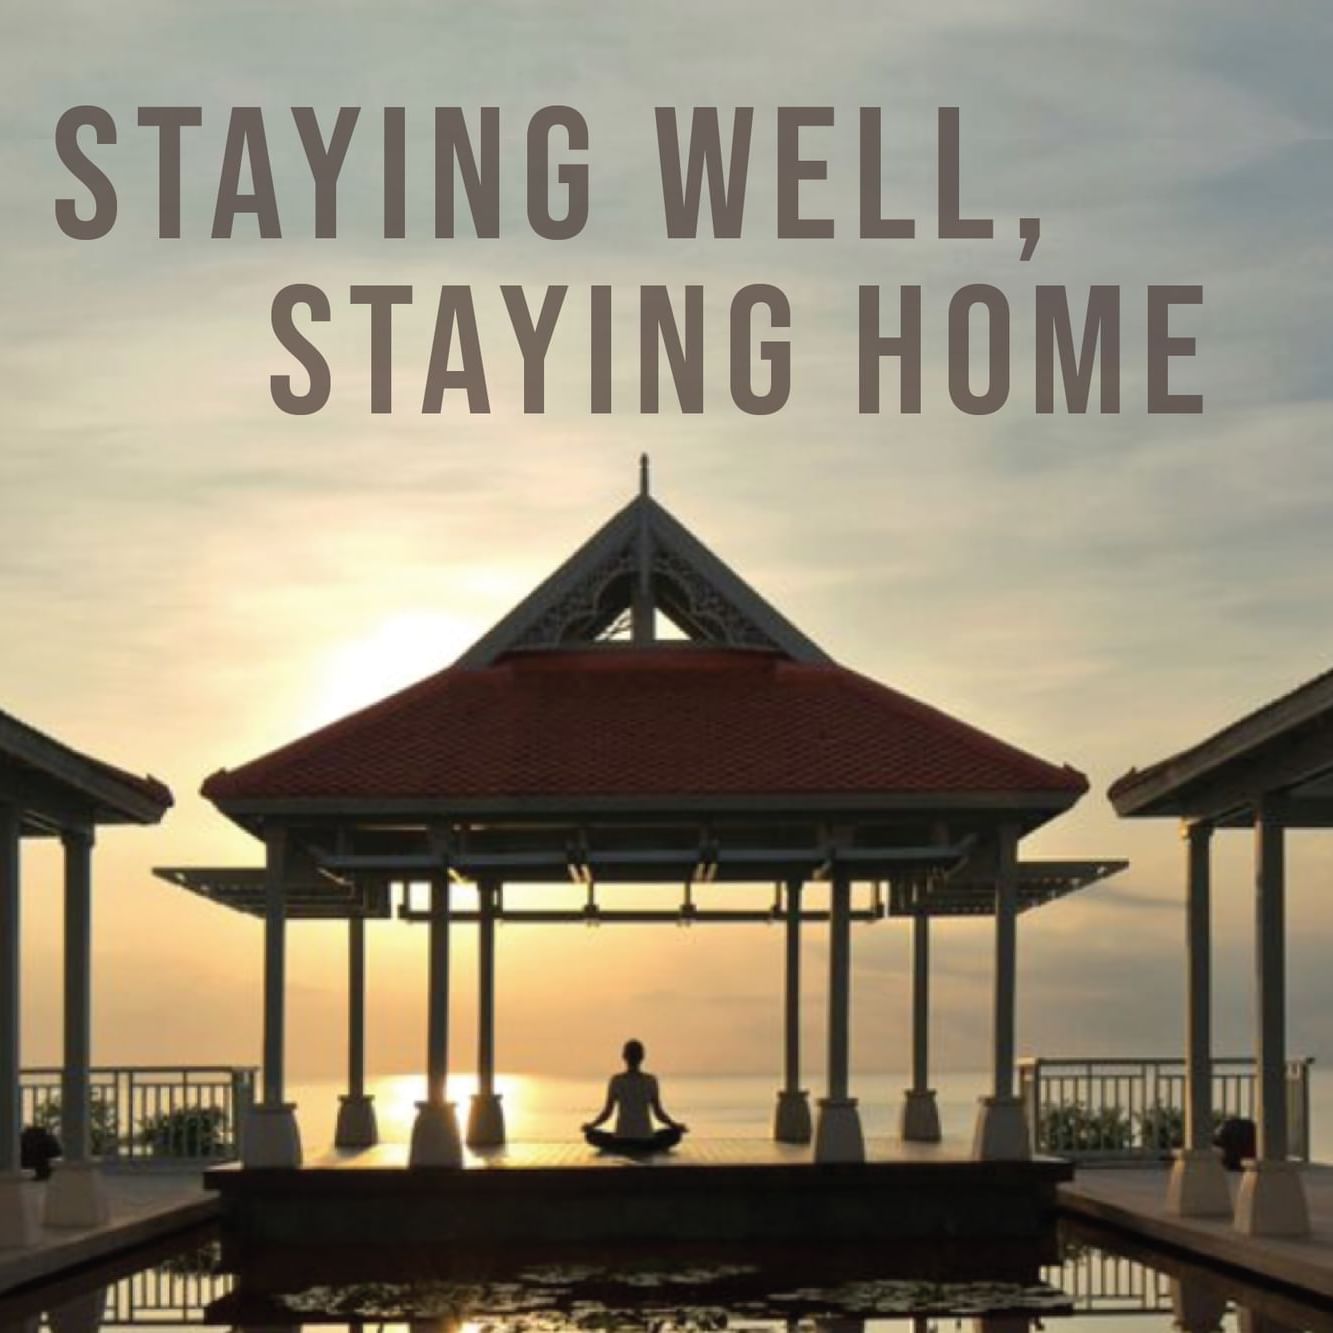 Poster of Staying well, staying home at Amatara Resort